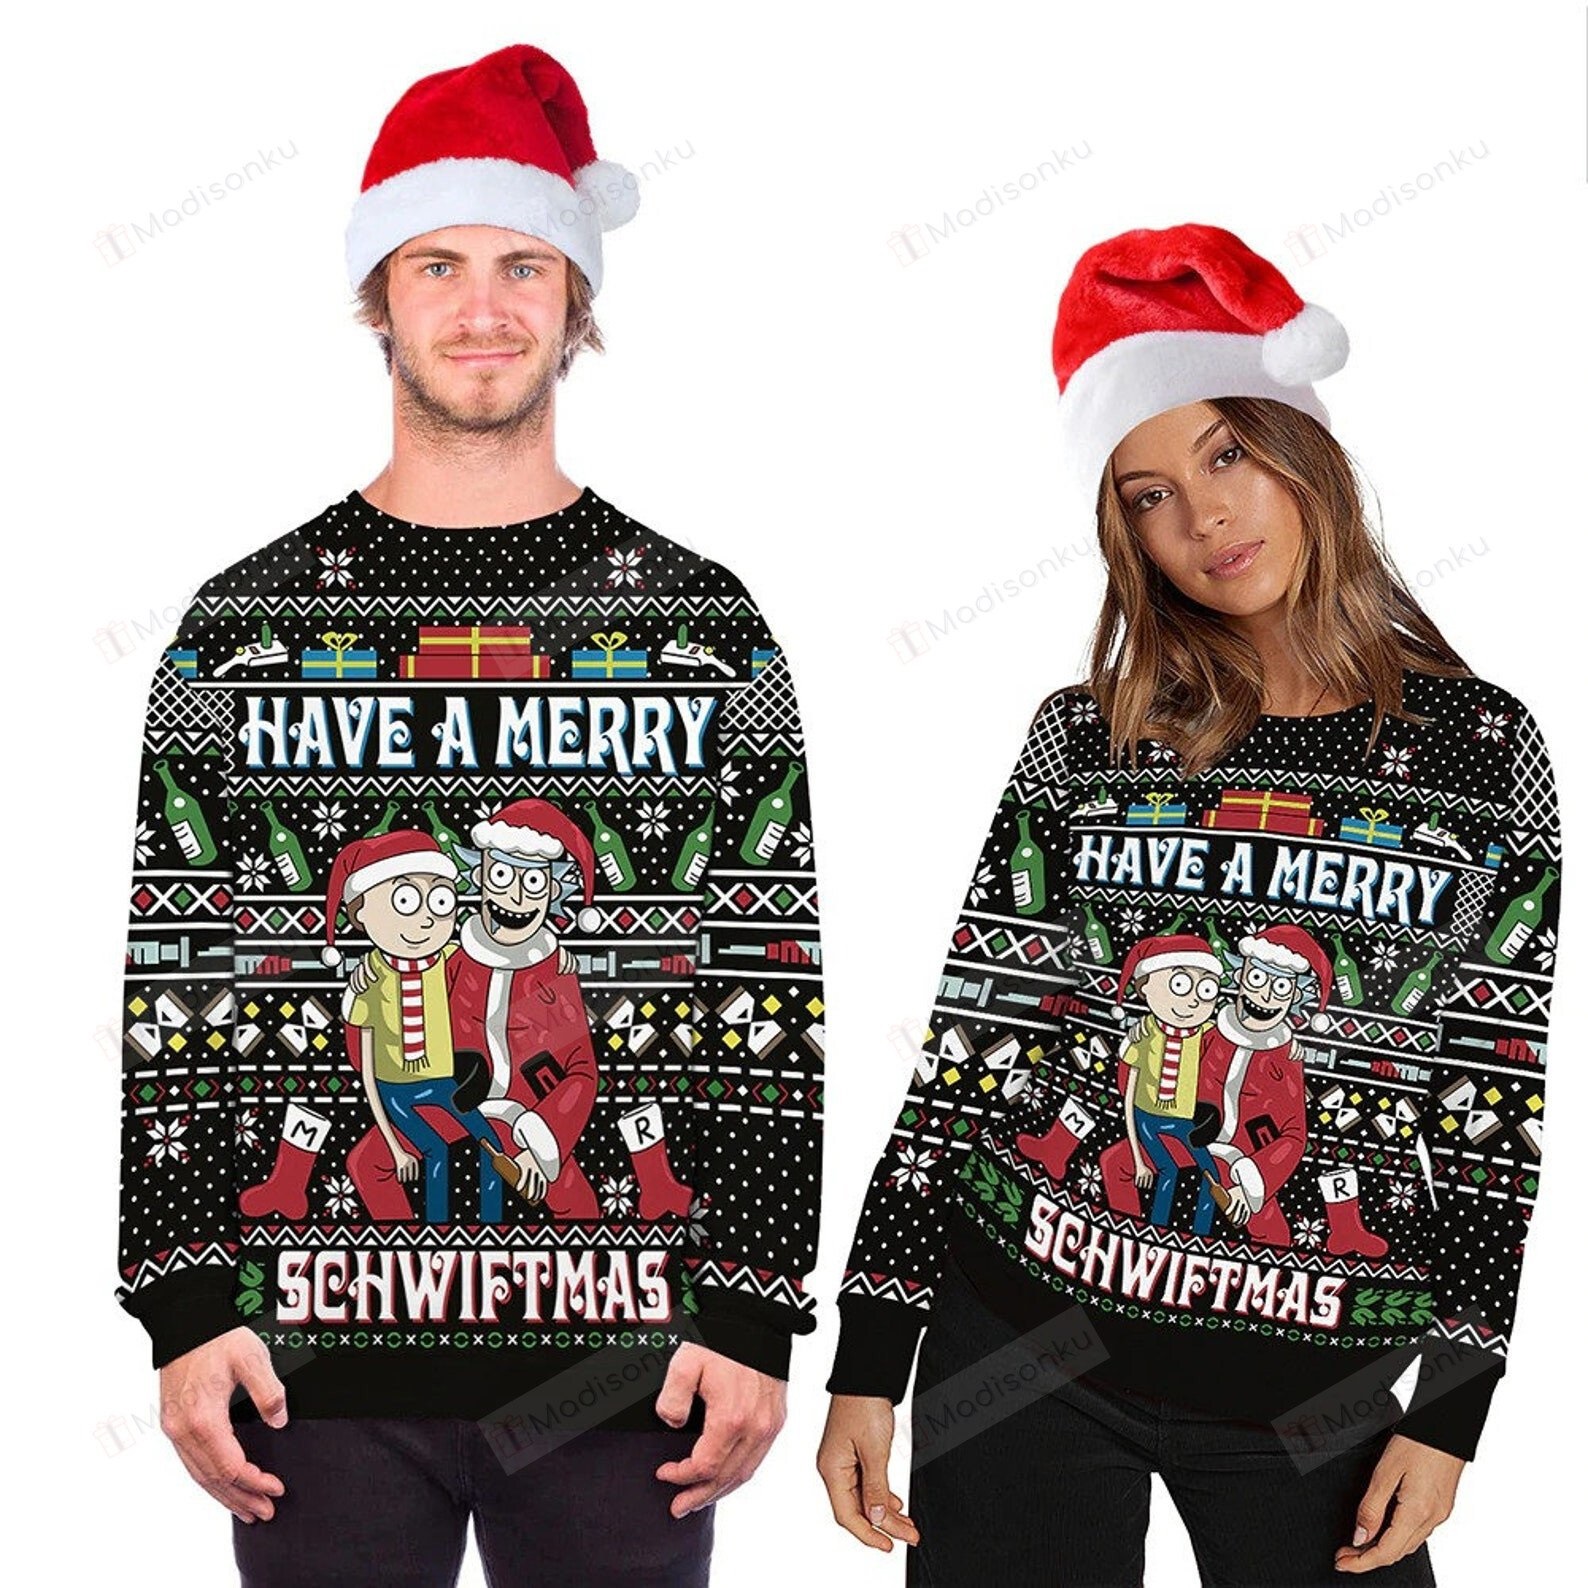 [ Amazing ] Rick and Morty Have a merry schwiftmas ugly christmas sweater – Saleoff 301121